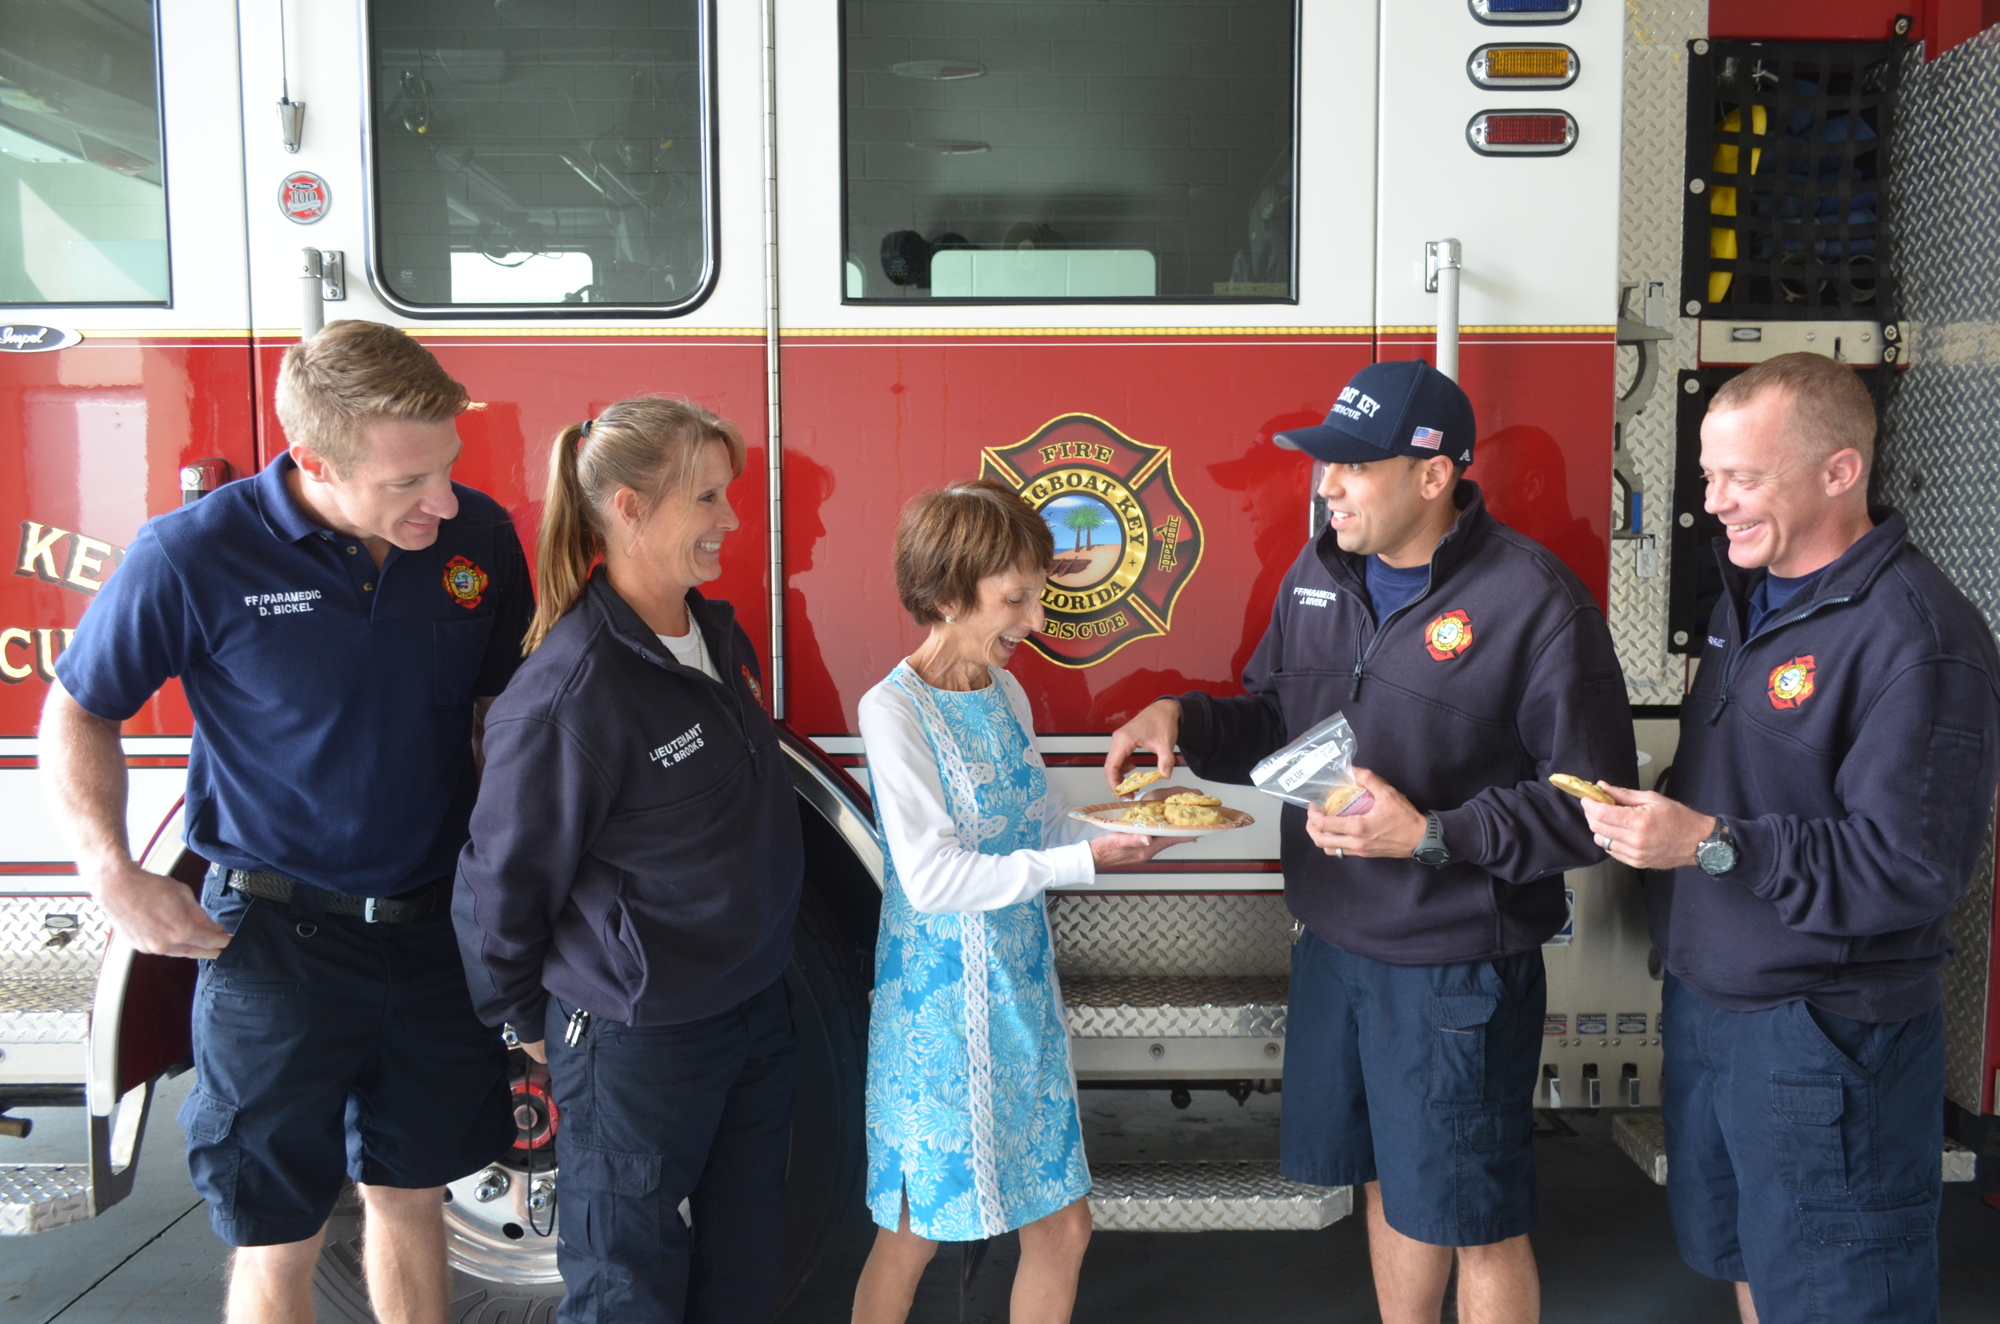 Maryann Mazzaferro bakes cookies and shares them with the community. Here she gives them to the Longboat Key Fire Rescue.